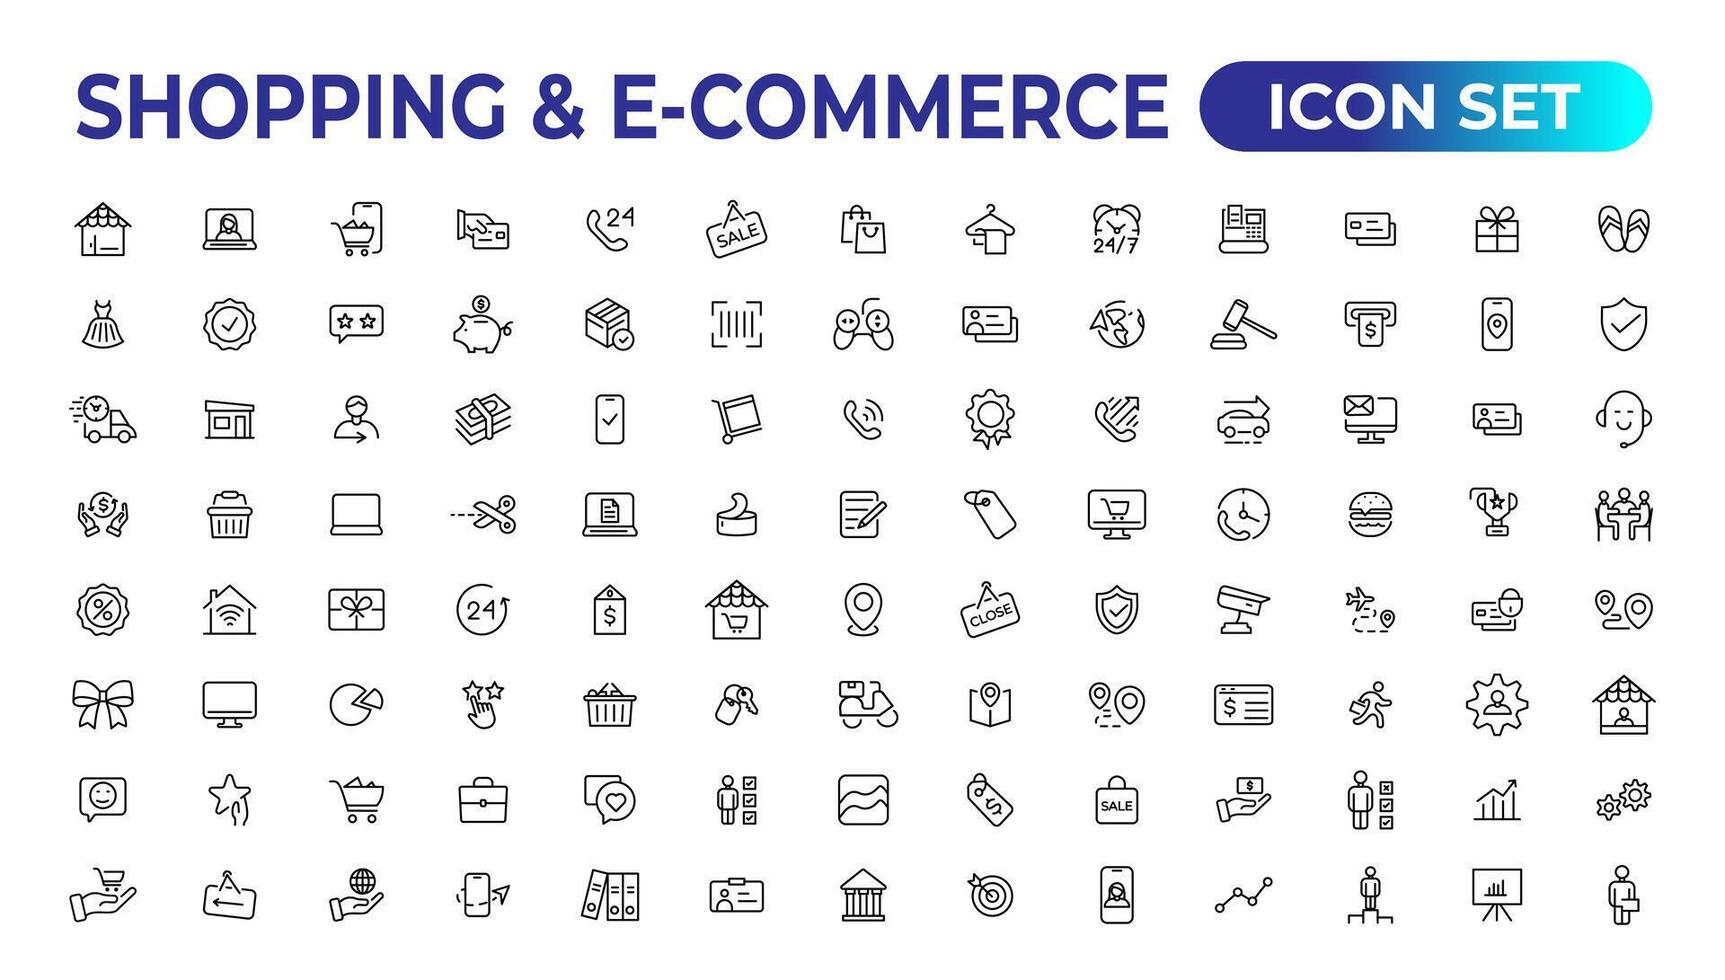 Shopping web icons in line style. Mobile Shop, Digital marketing, Bank Card, Gifts. Vector illustration.